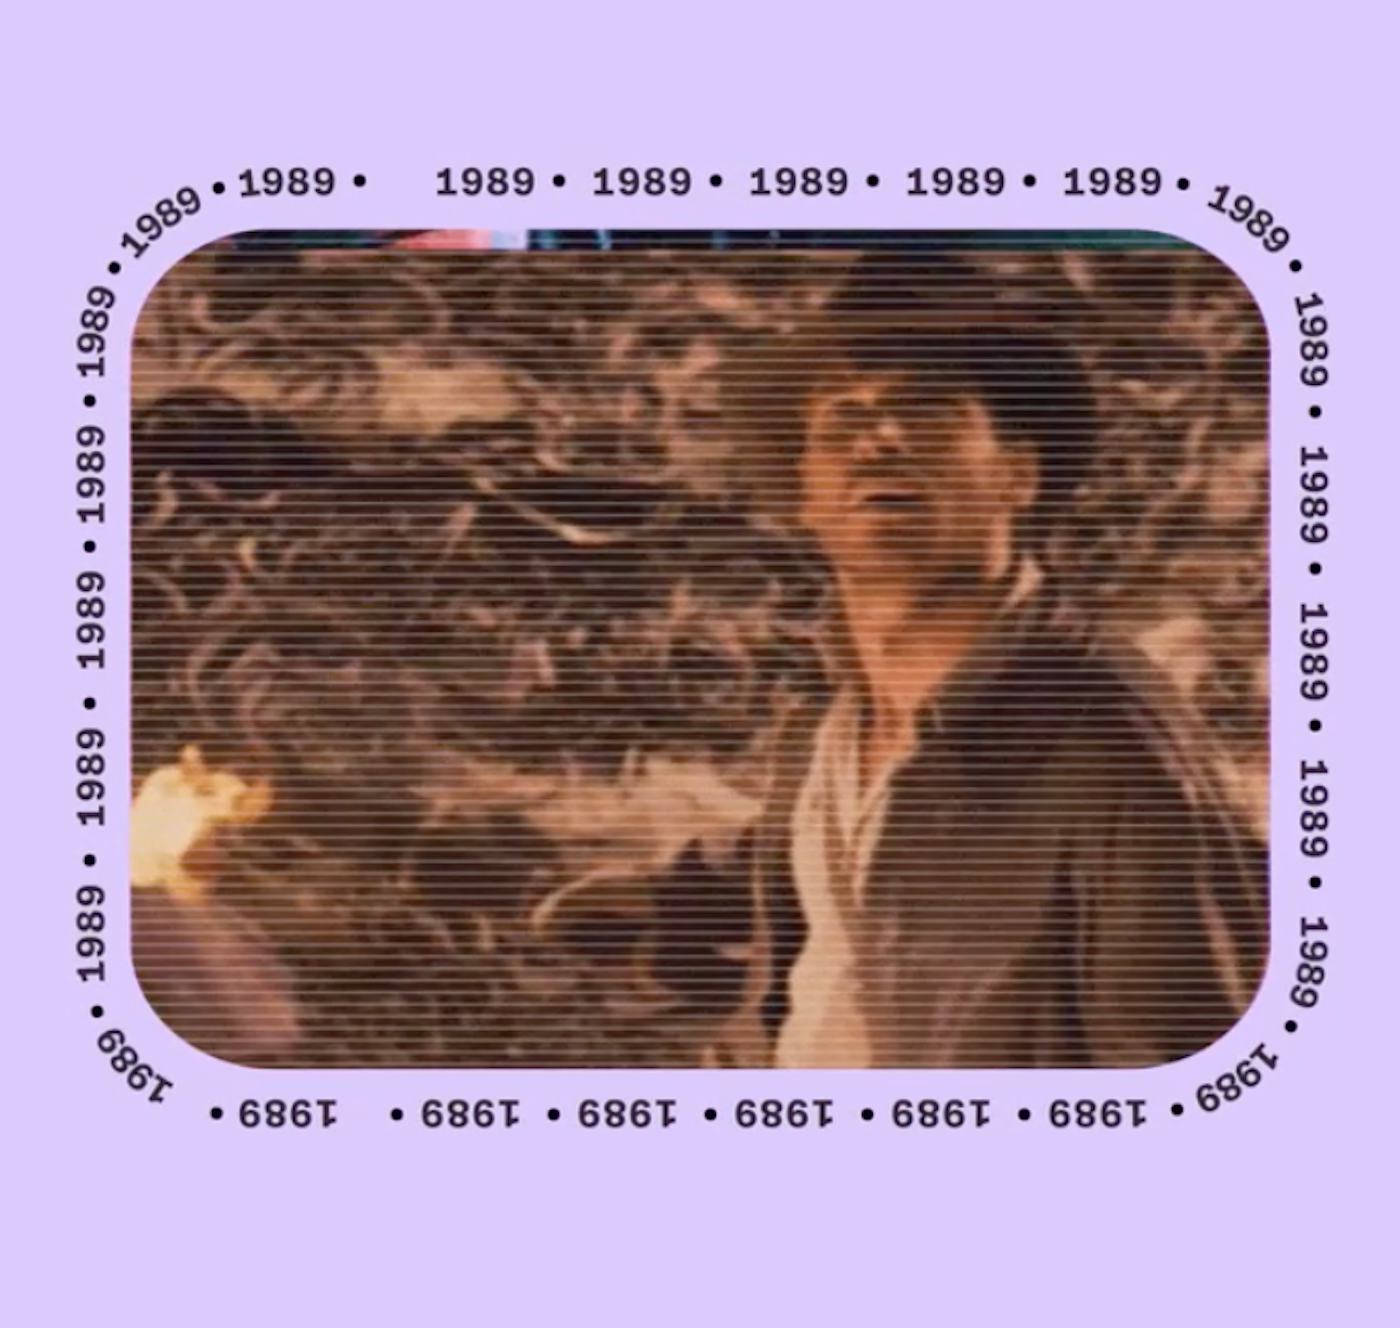 Retro-style image of a man in a fedora hat with a patterned background, framed by an oval border and repeated '1989' texts.